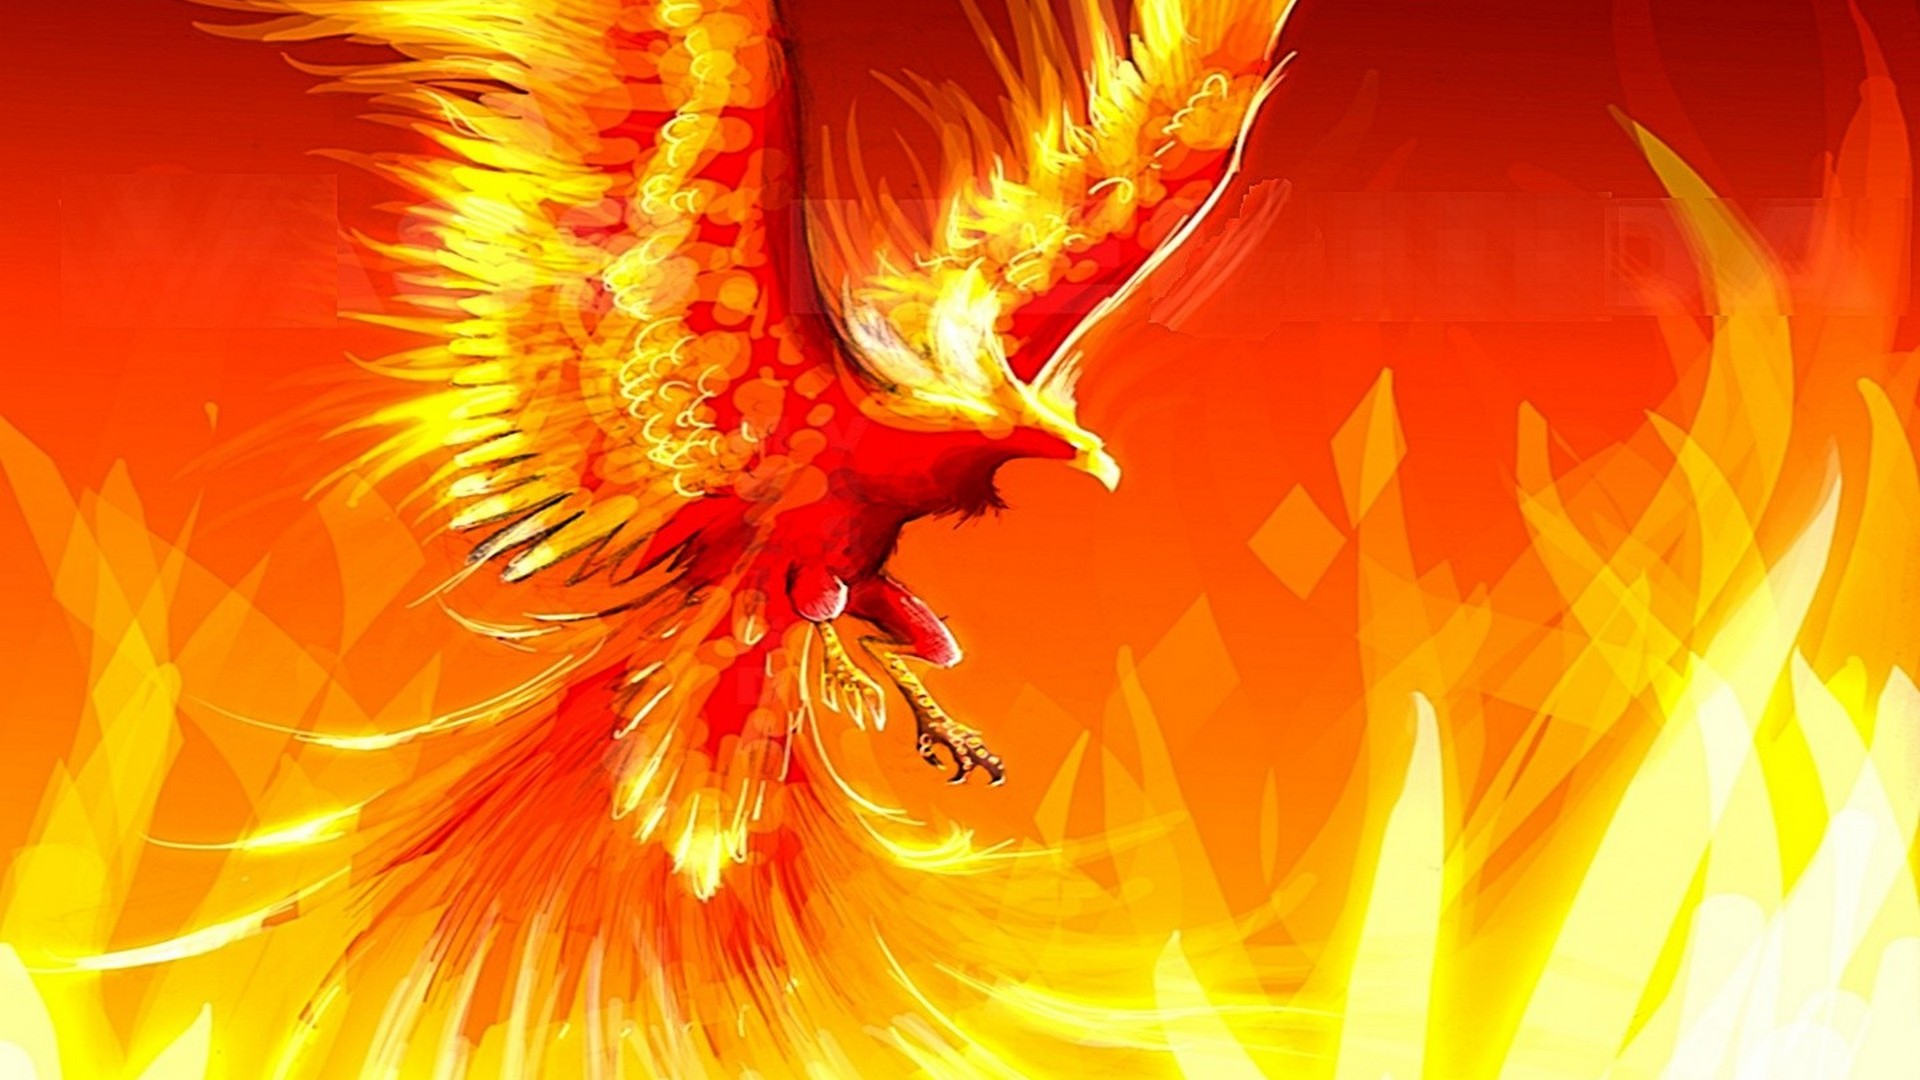 Phoenix Bird HD Wallpaper With Resolution 1920X1080 pixel. You can make this wallpaper for your Desktop Computer Backgrounds, Mac Wallpapers, Android Lock screen or iPhone Screensavers